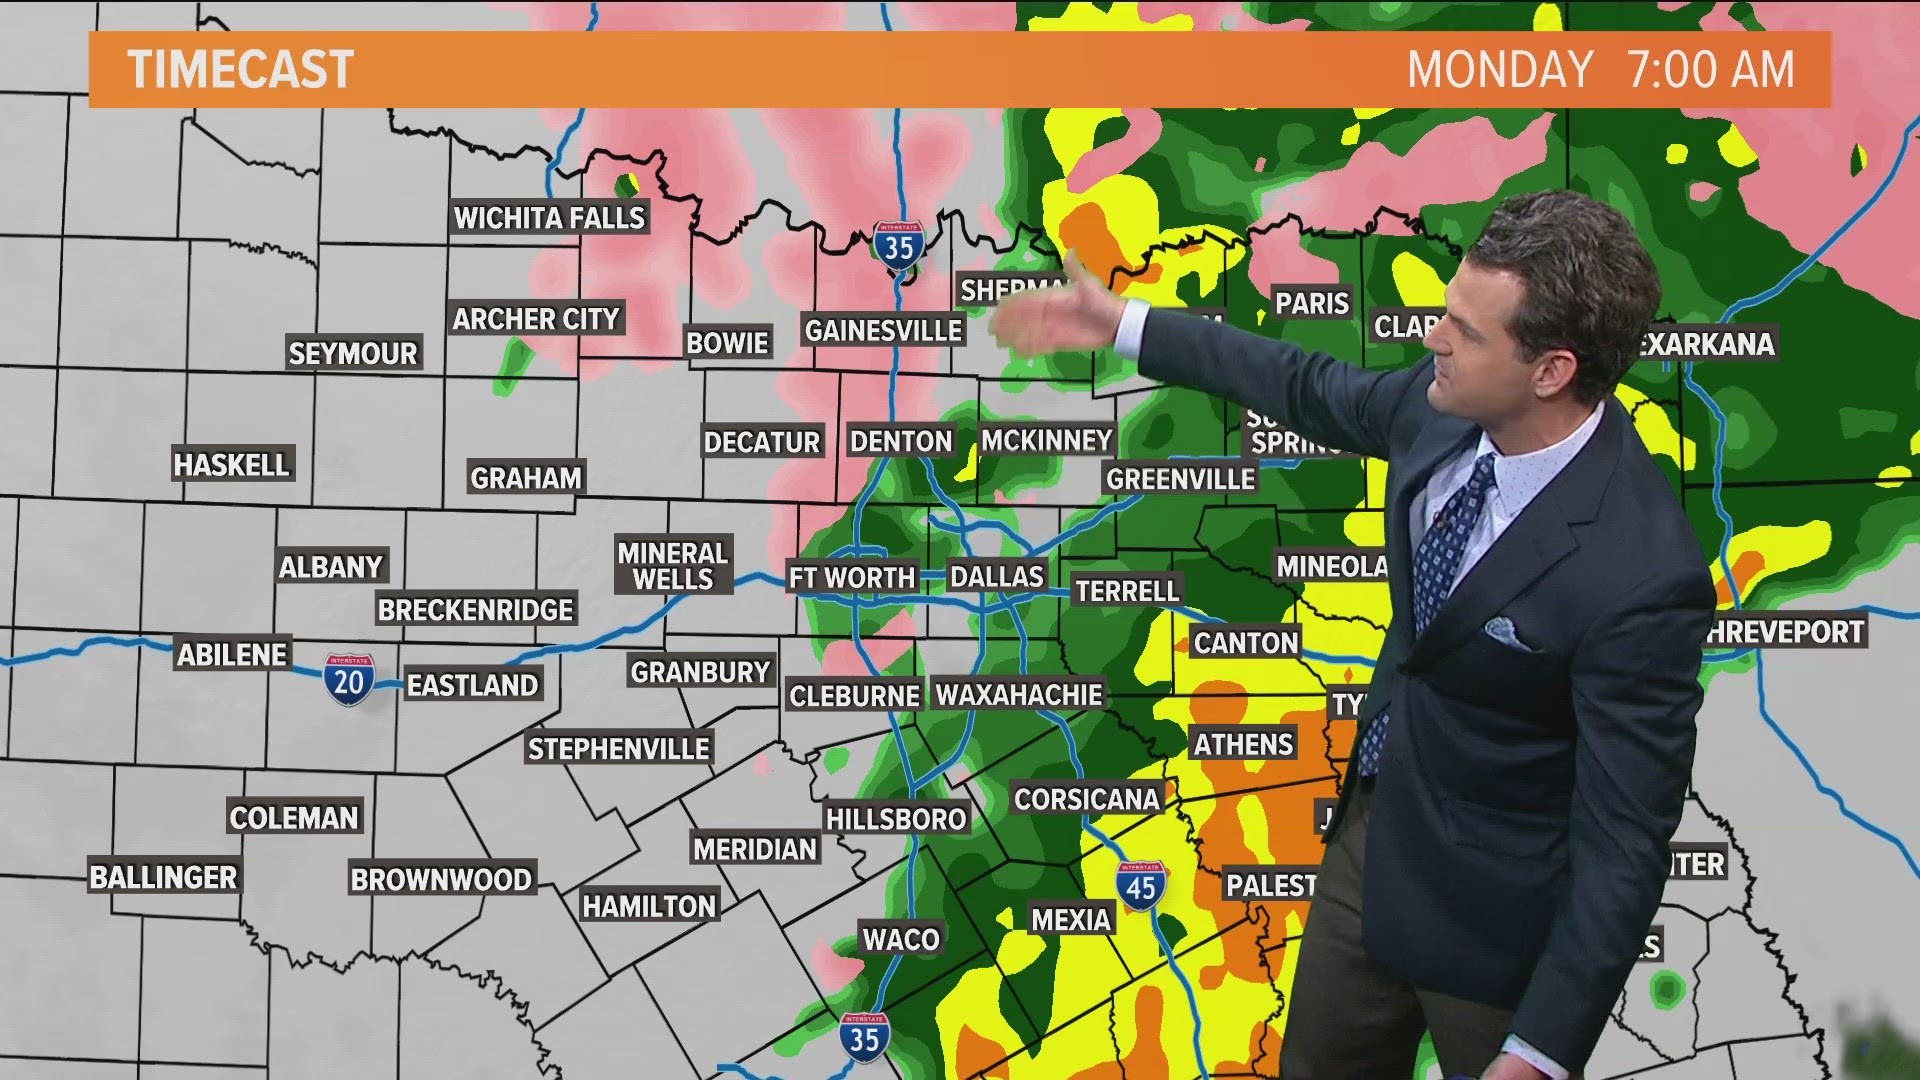 We look at who has the chance to see freezing drizzle.